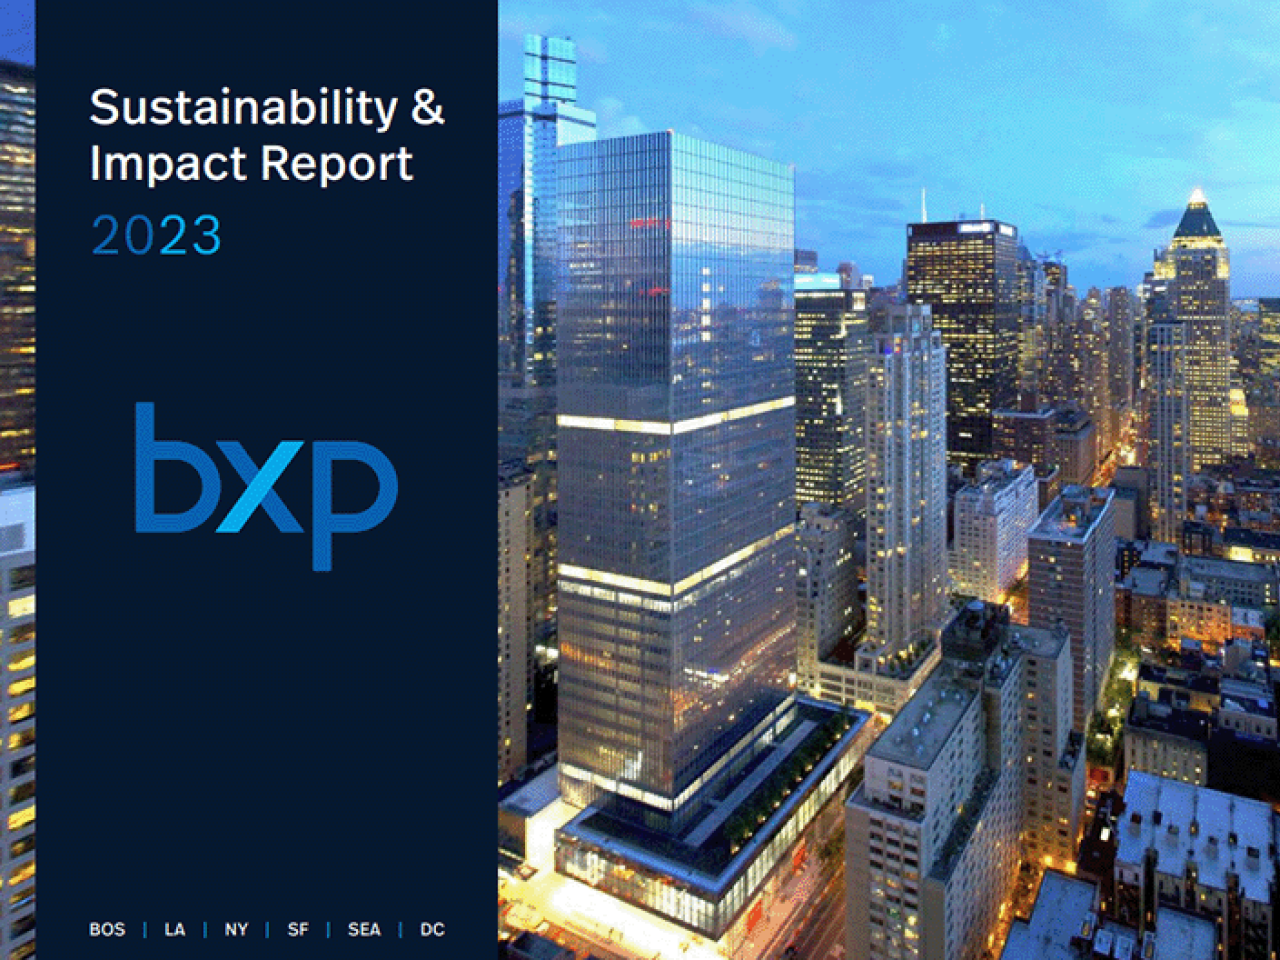 BXP 2023 Sustainability & Impact Report cover